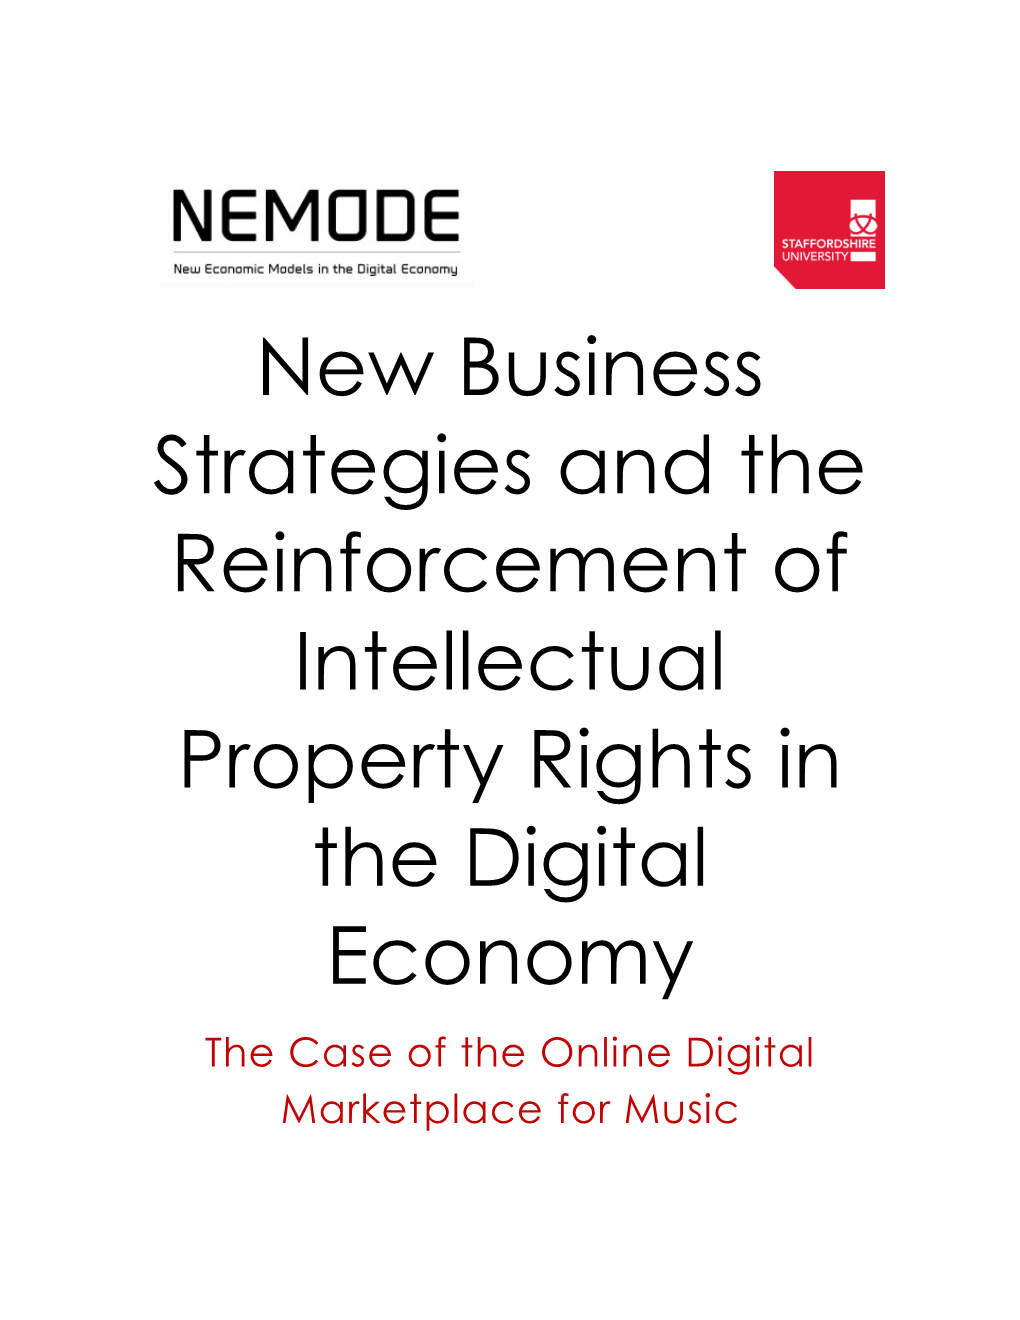 New Business Strategies and the Reinforcement of Intellectual Property Rights in the Digital Economy the Case of the Online Digital Marketplace for Music